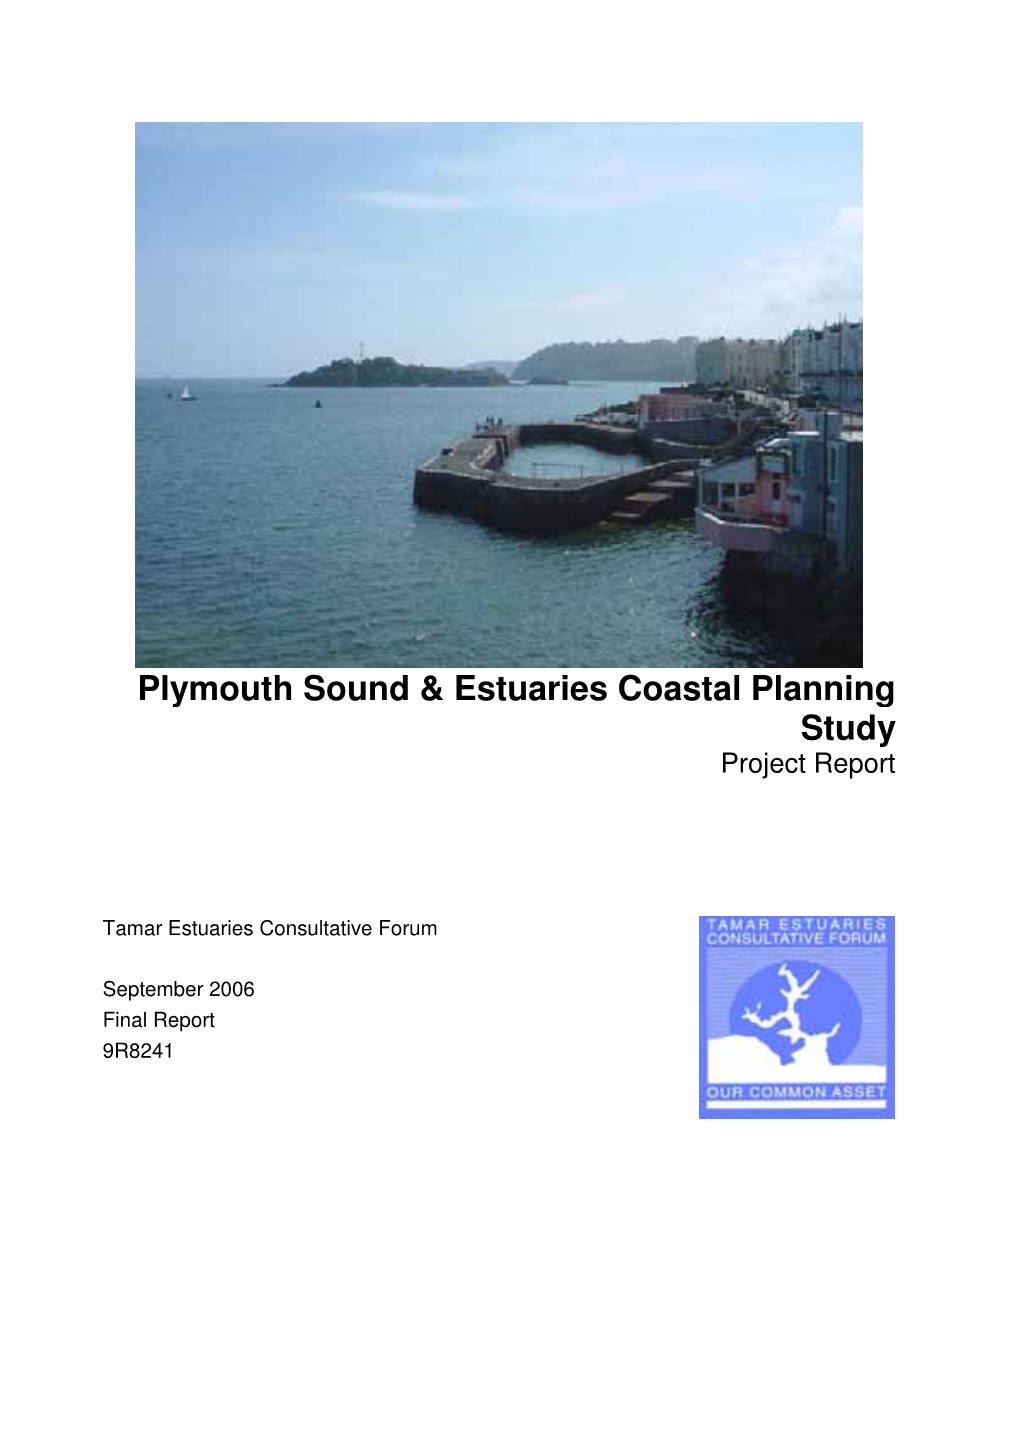 Plymouth Sound and Estuaries Coastal Planning Study: Project Report